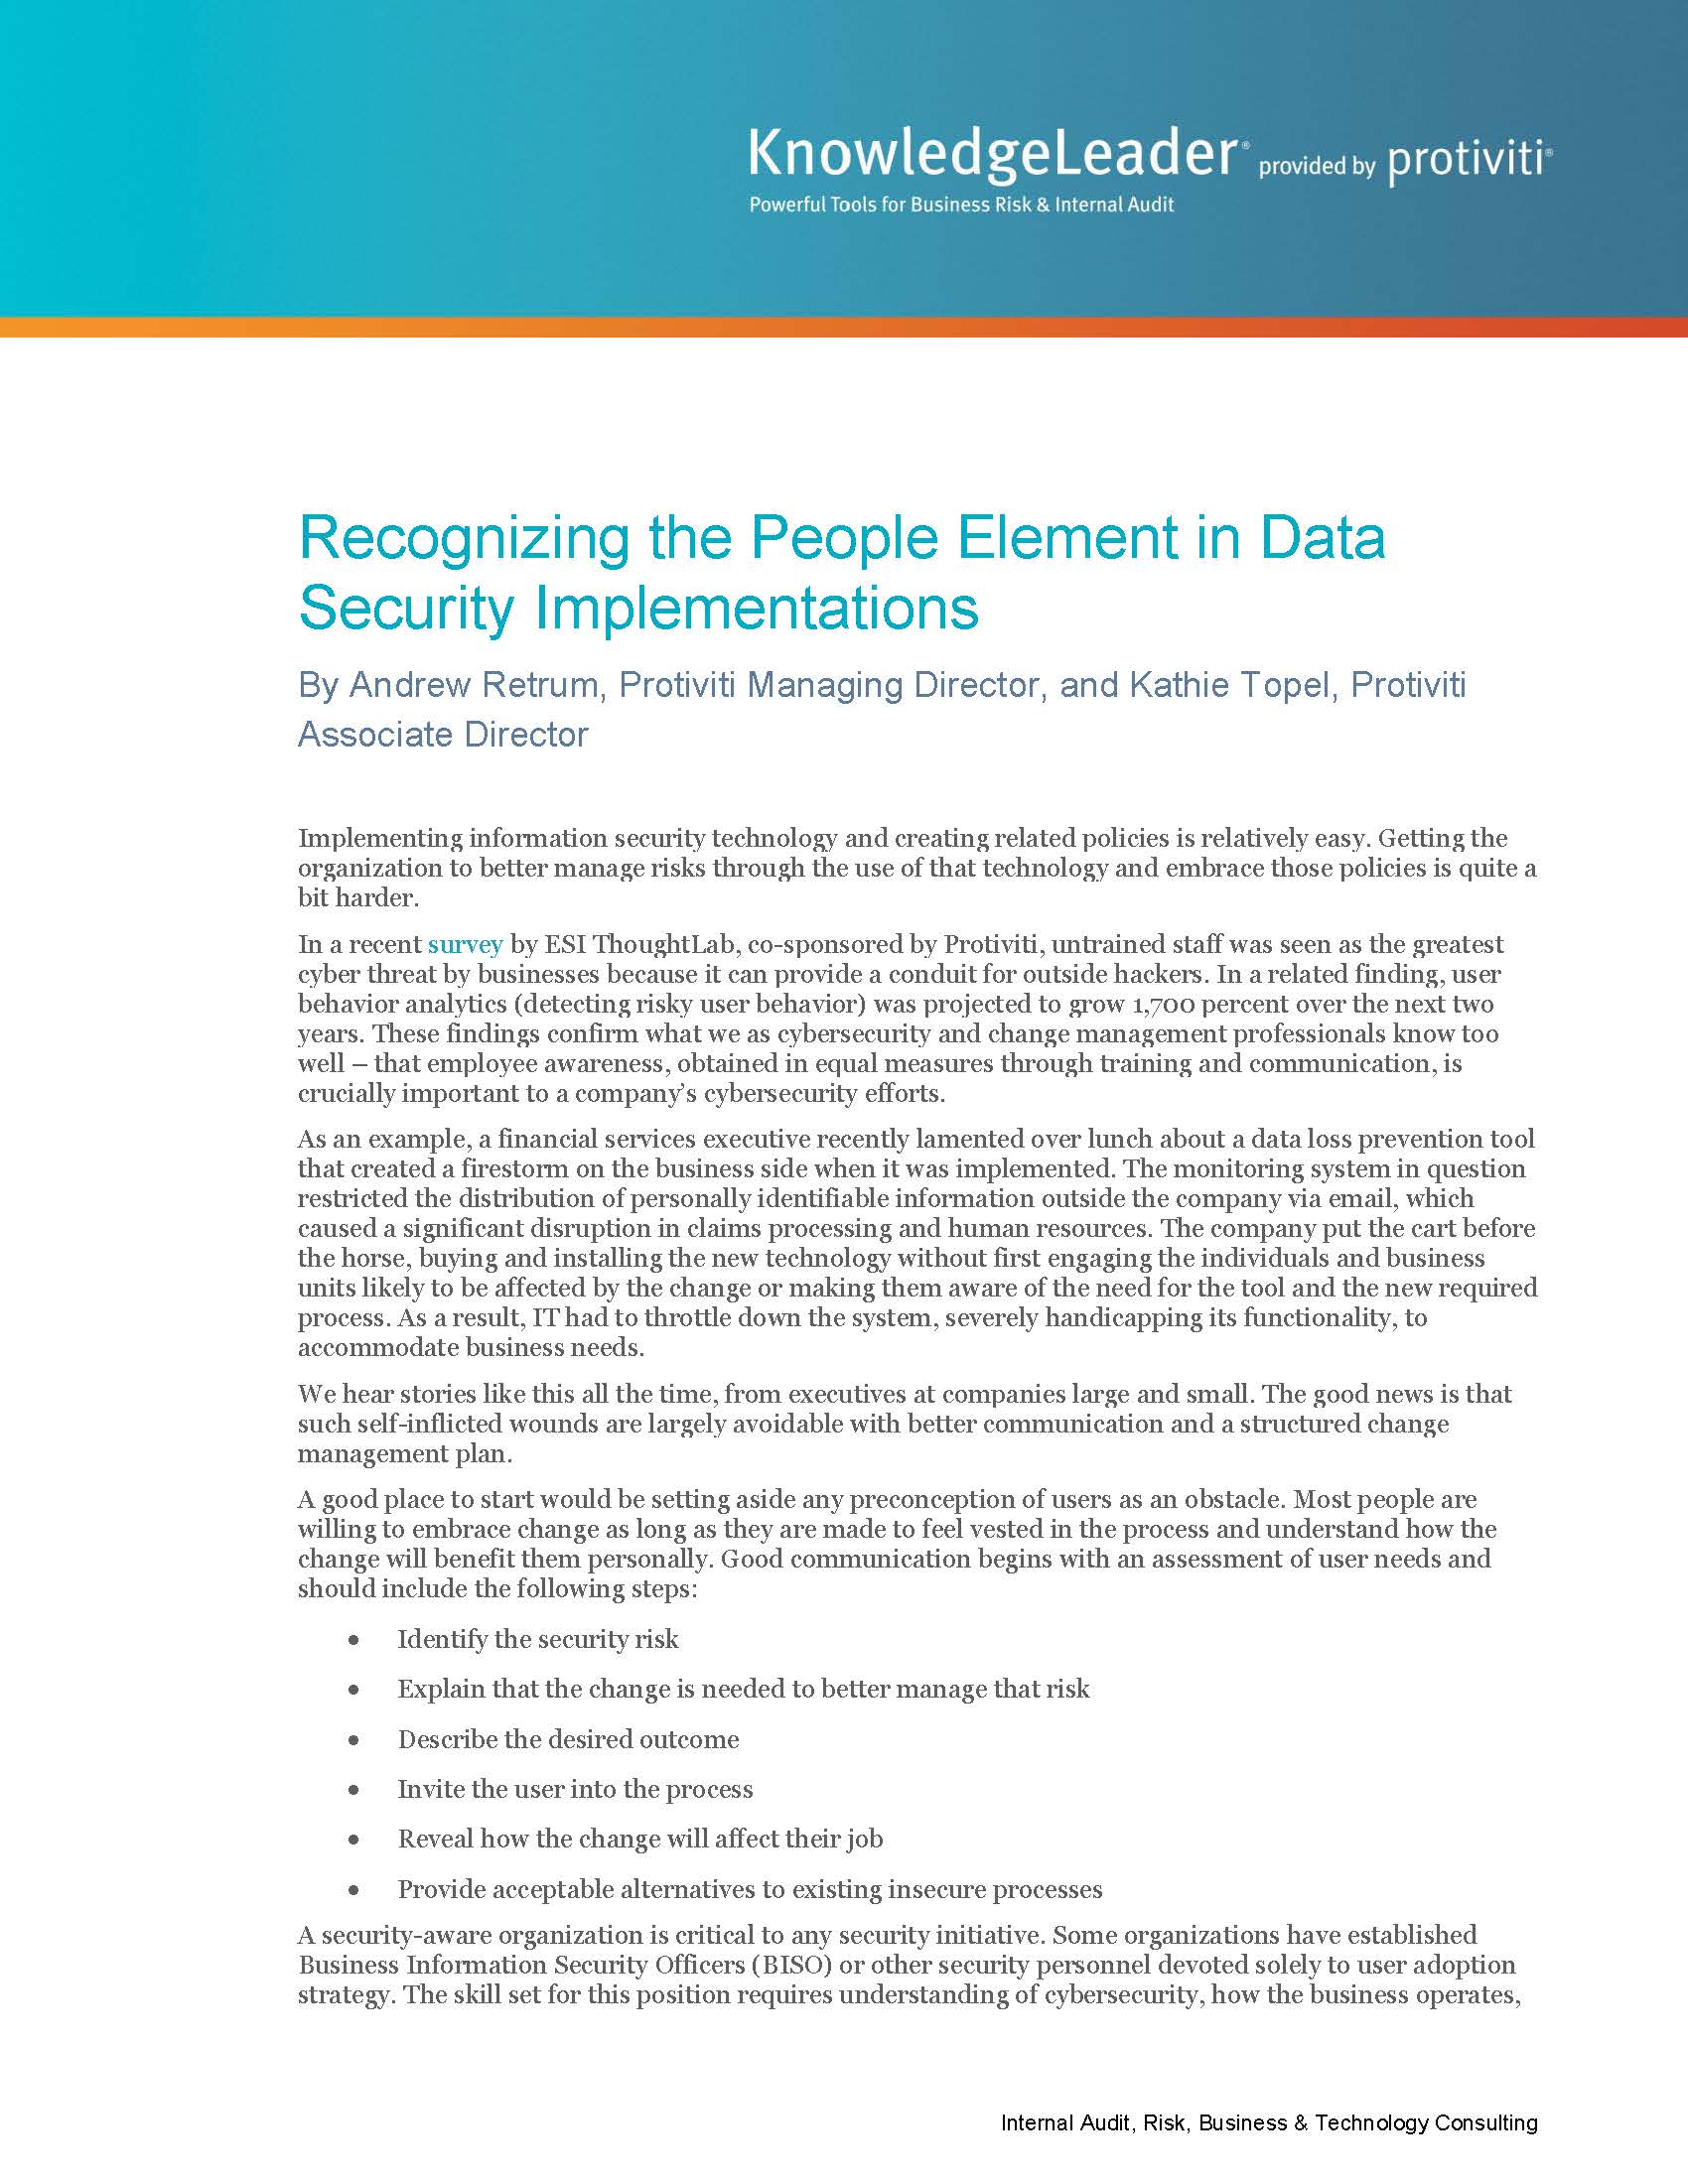 Screenshot of the first page of Recognizing the People Element in Data Security Implementations